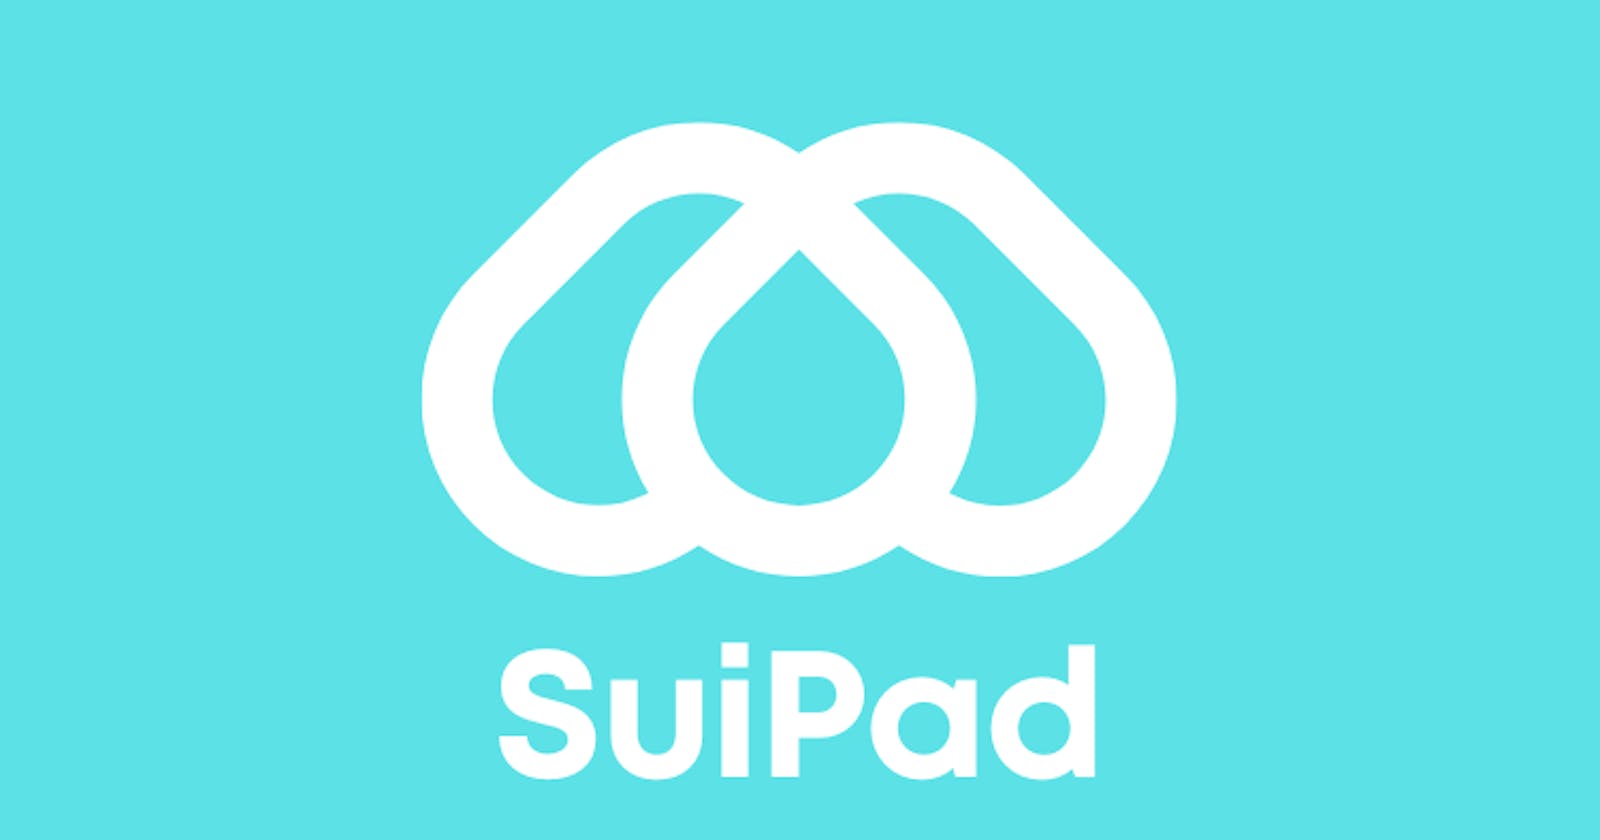 What is Suipad?